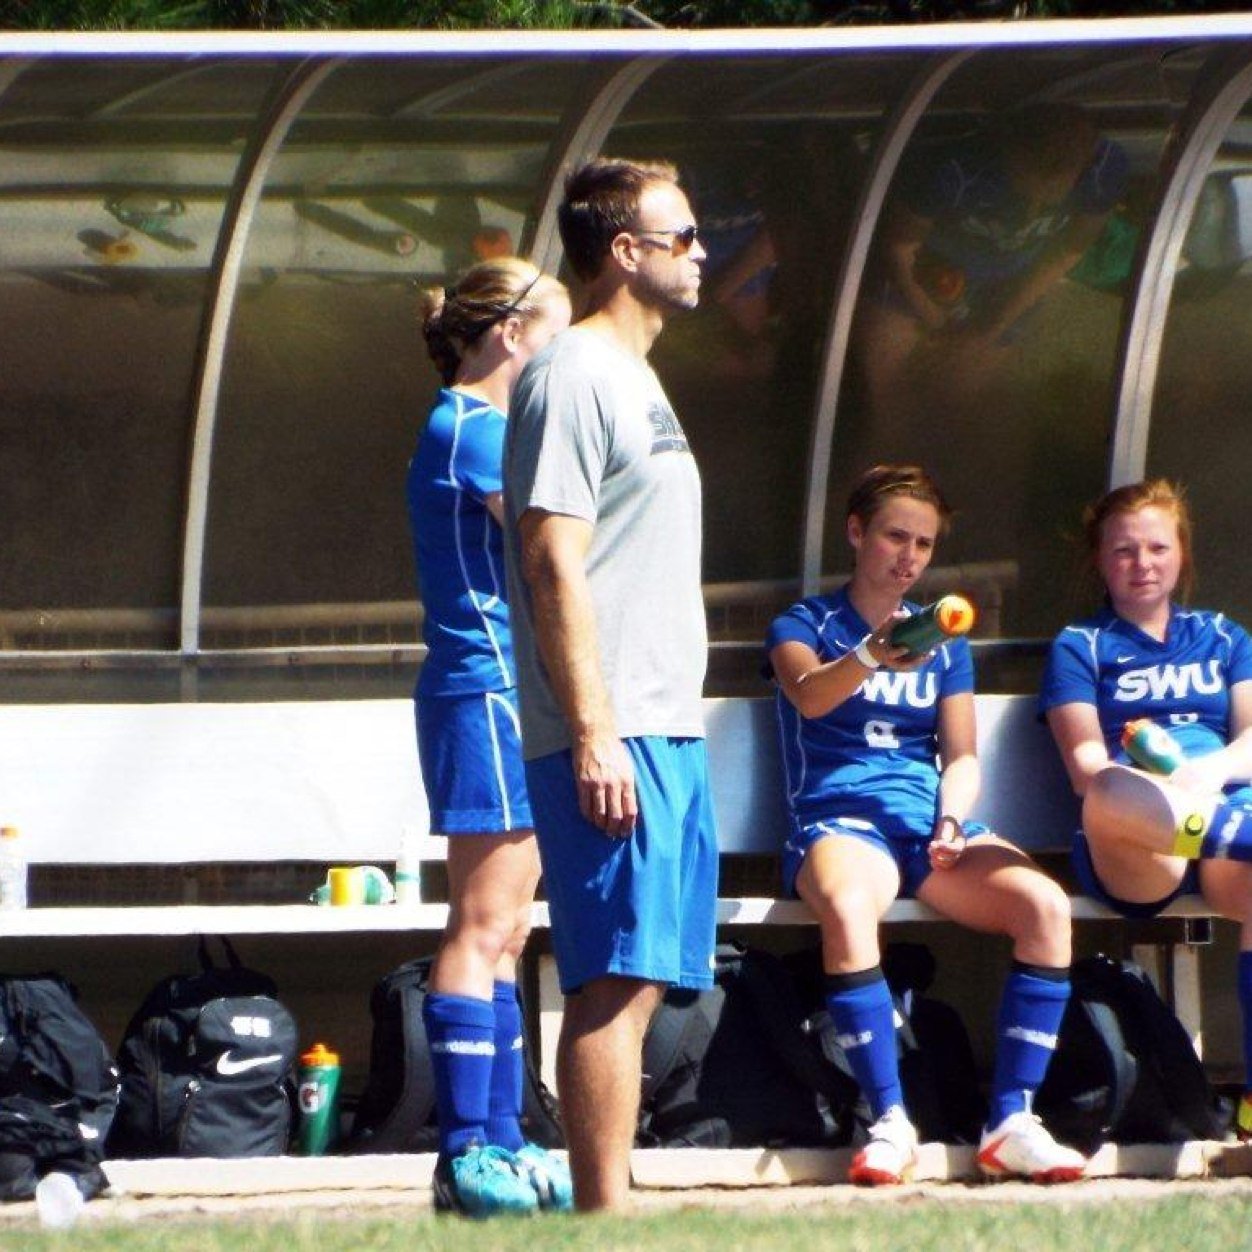 Husband, Father of Three, Soccer Coach at SWU